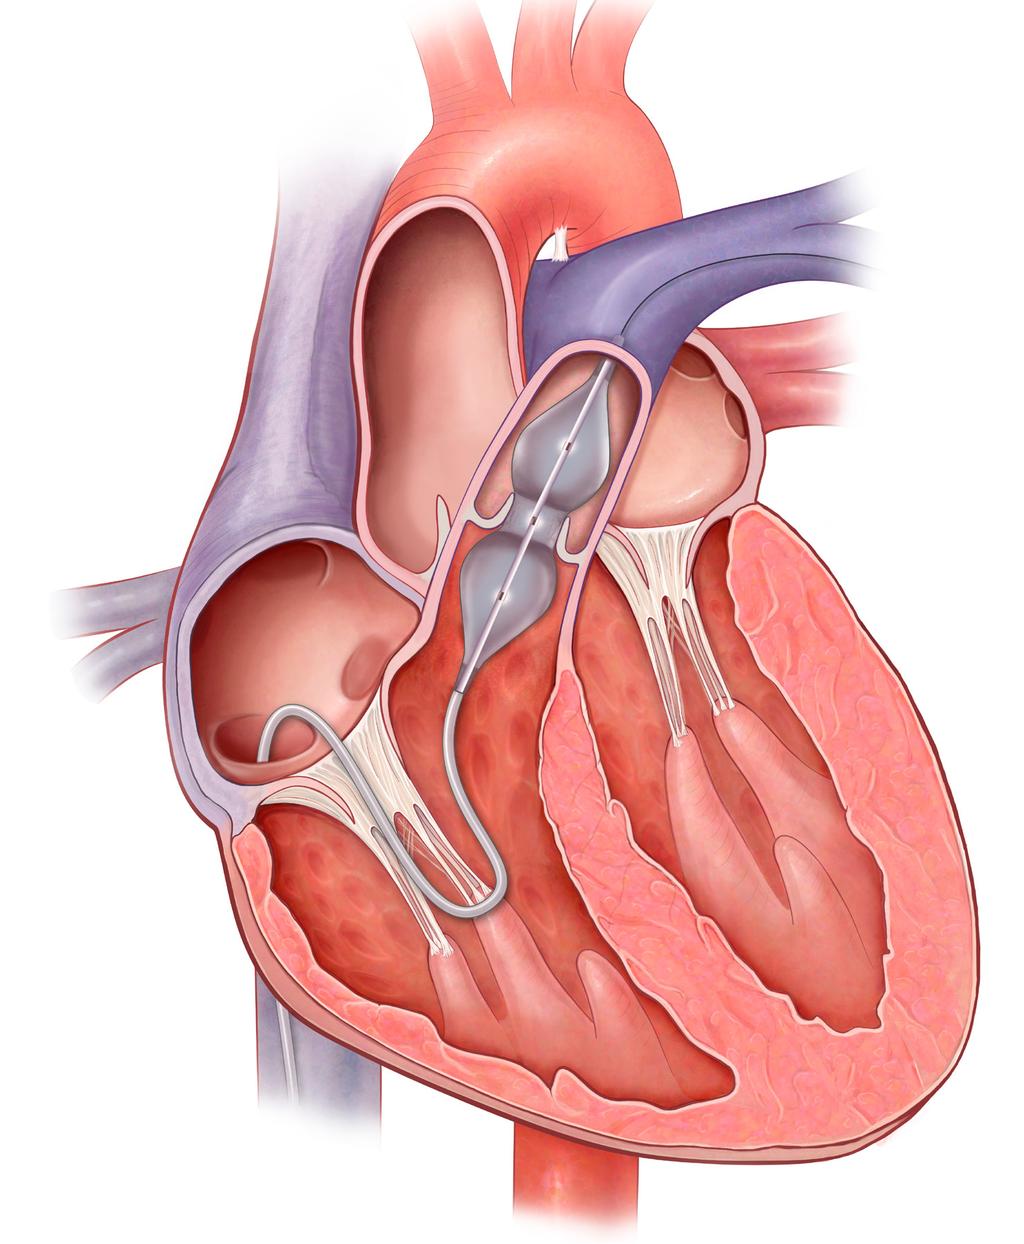 Indications for Use: The PTS and PTS-X Sizing Catheters are recommended for use in those patients with cardiovascular defects wherein accurate measurement of the defect is important to select the